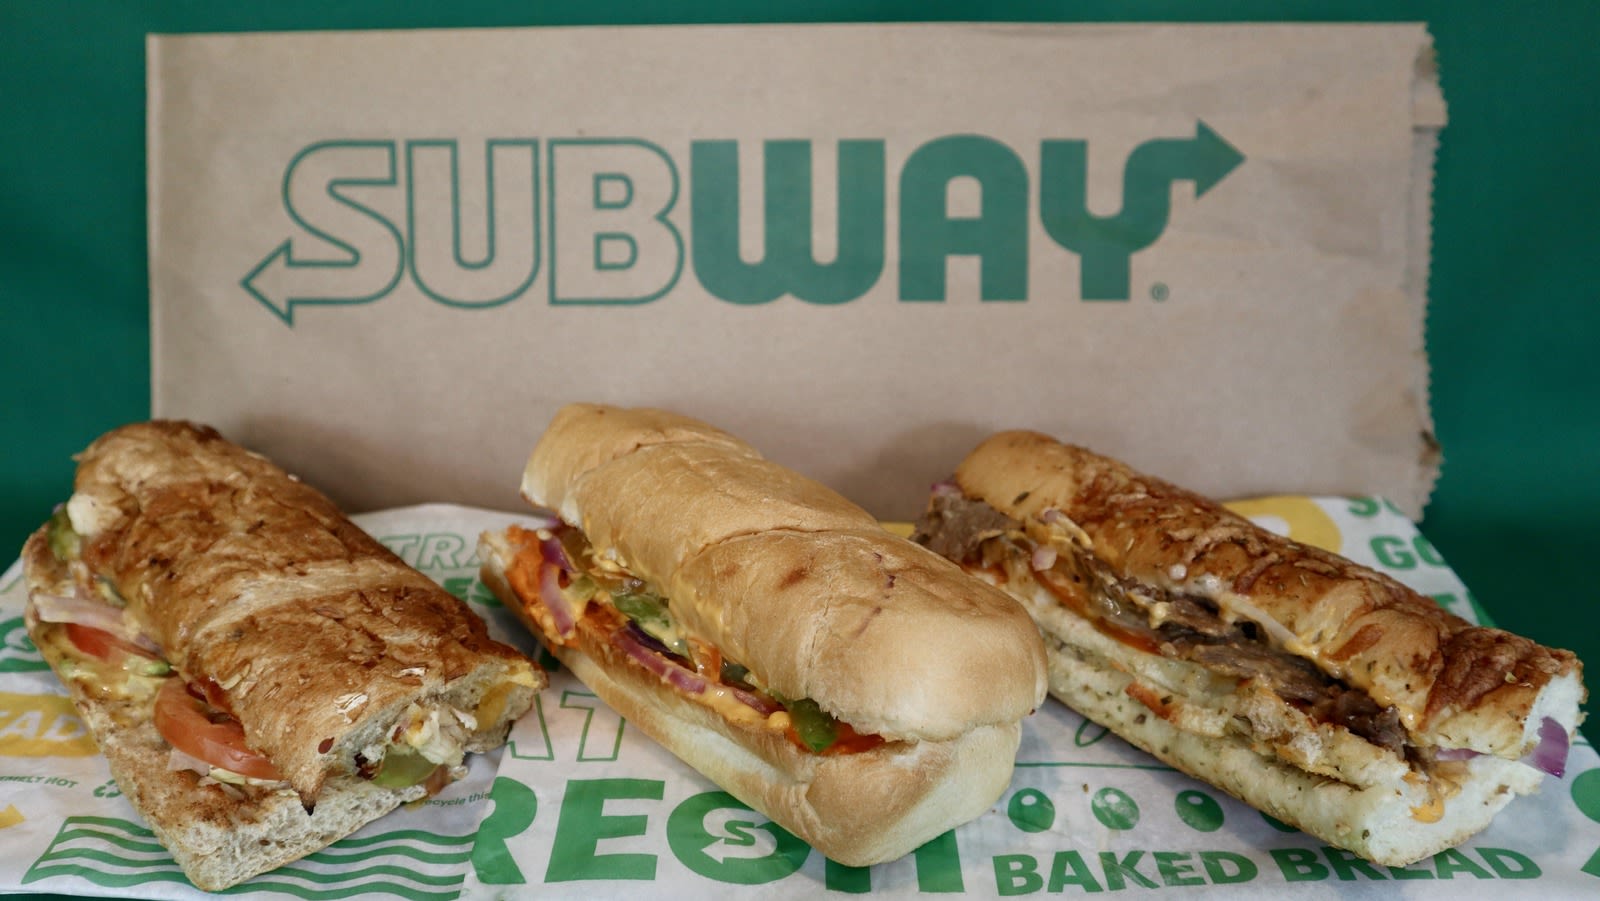 Review: Subway's New Saucy Sandwich Lineup Brings In Mixed Results